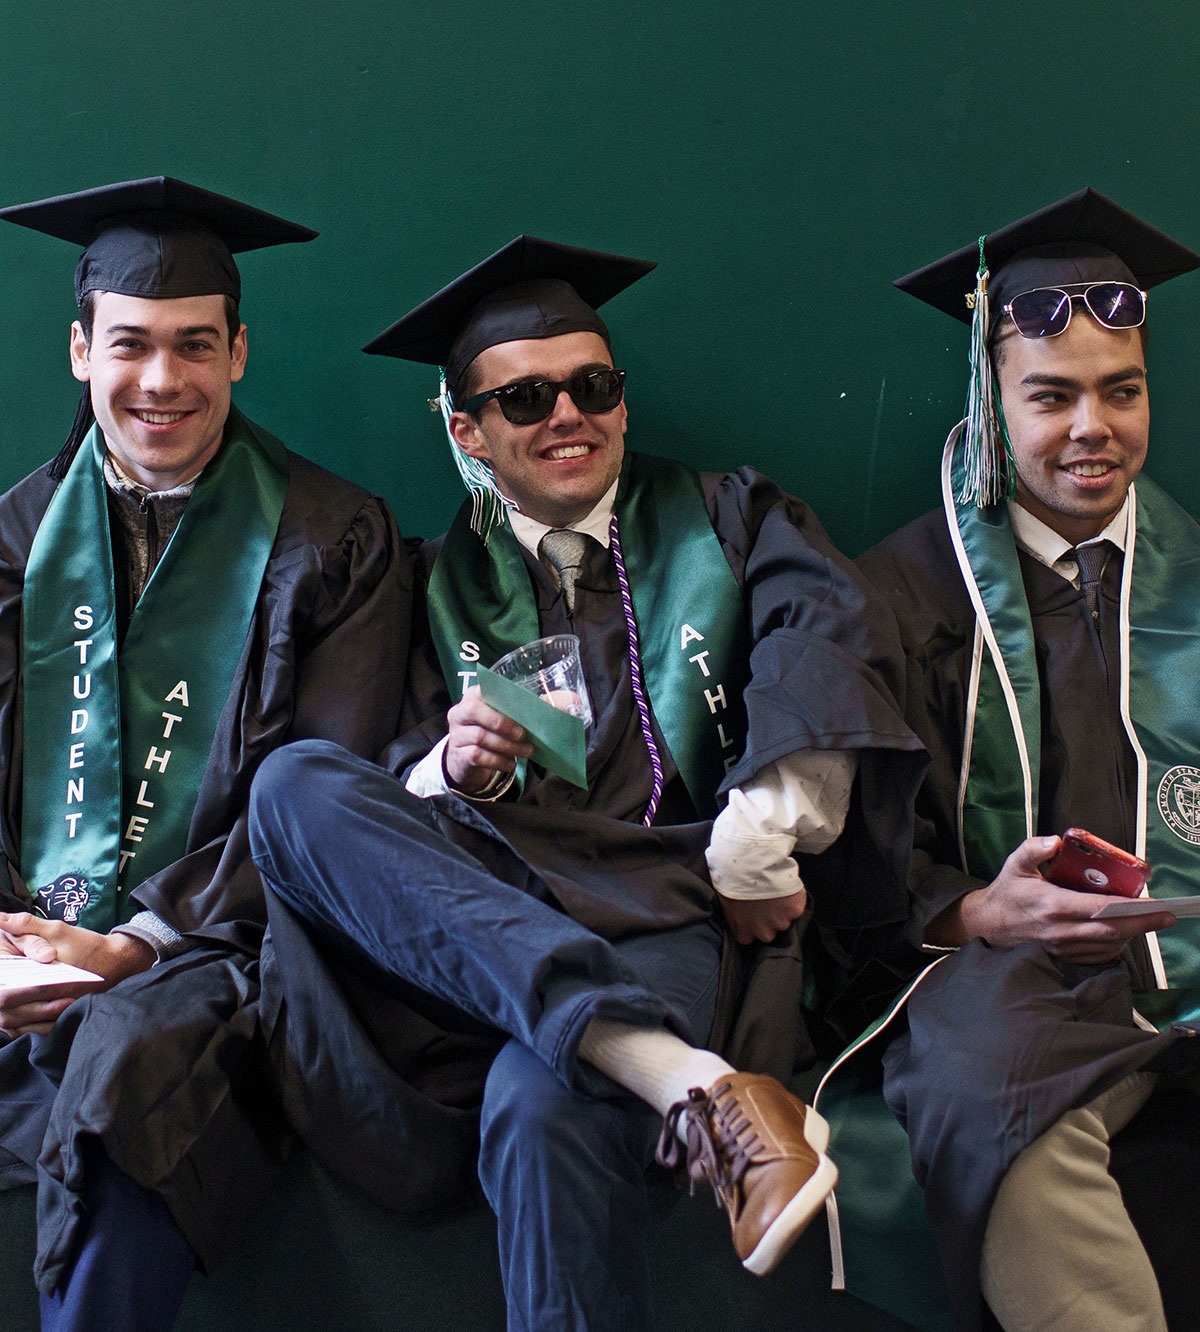 Three graduates sitting and posing for picture